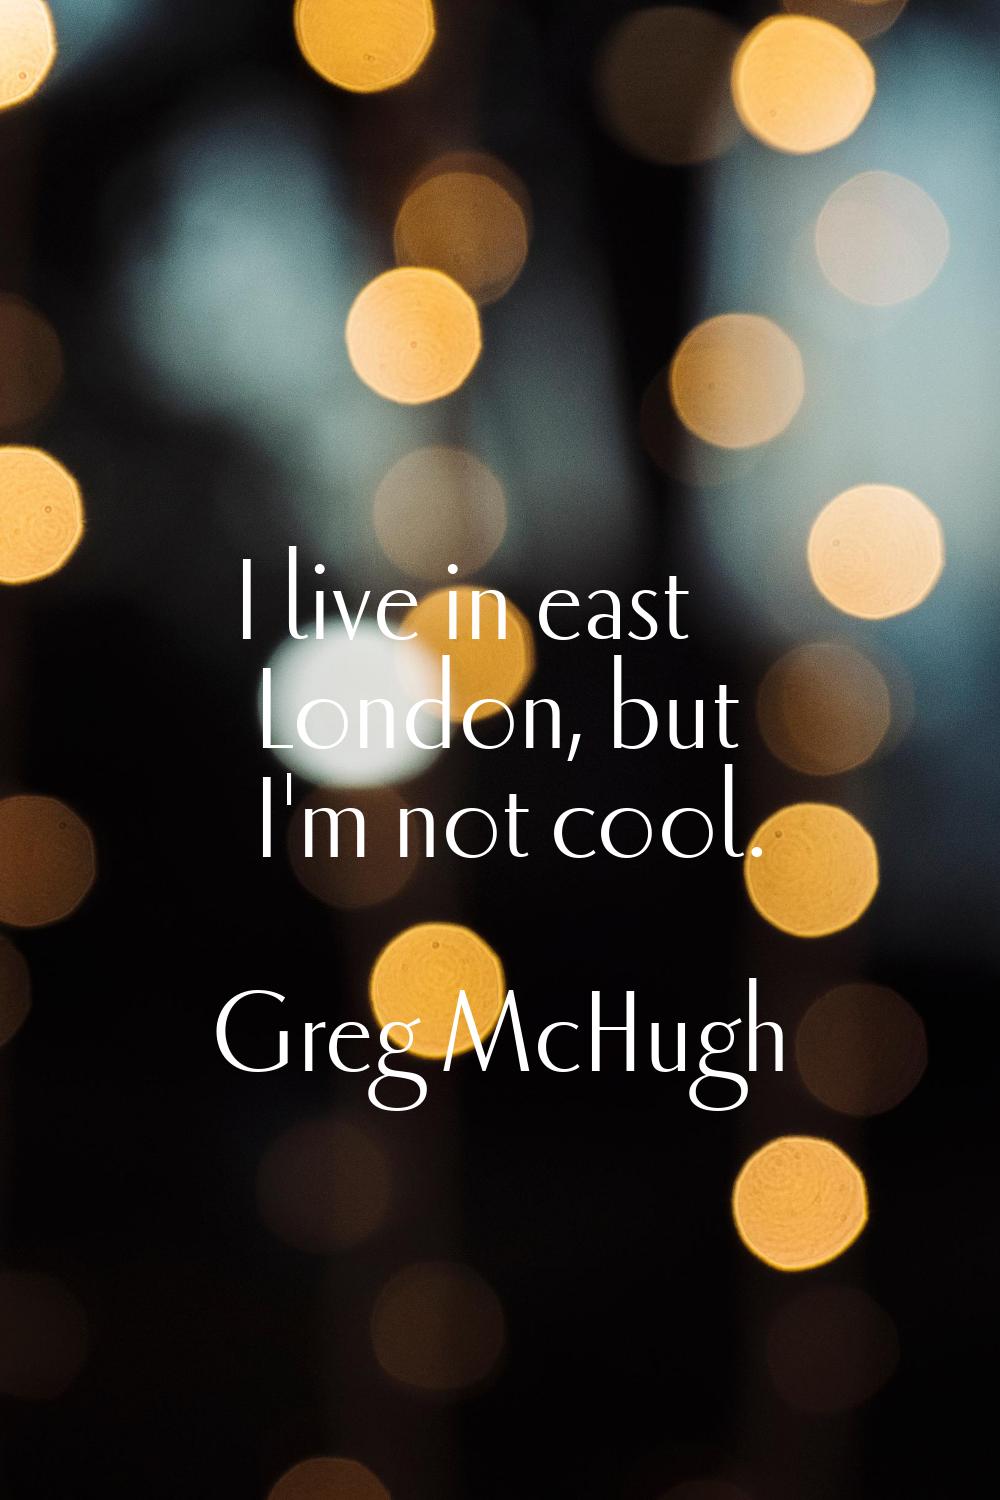 I live in east London, but I'm not cool.